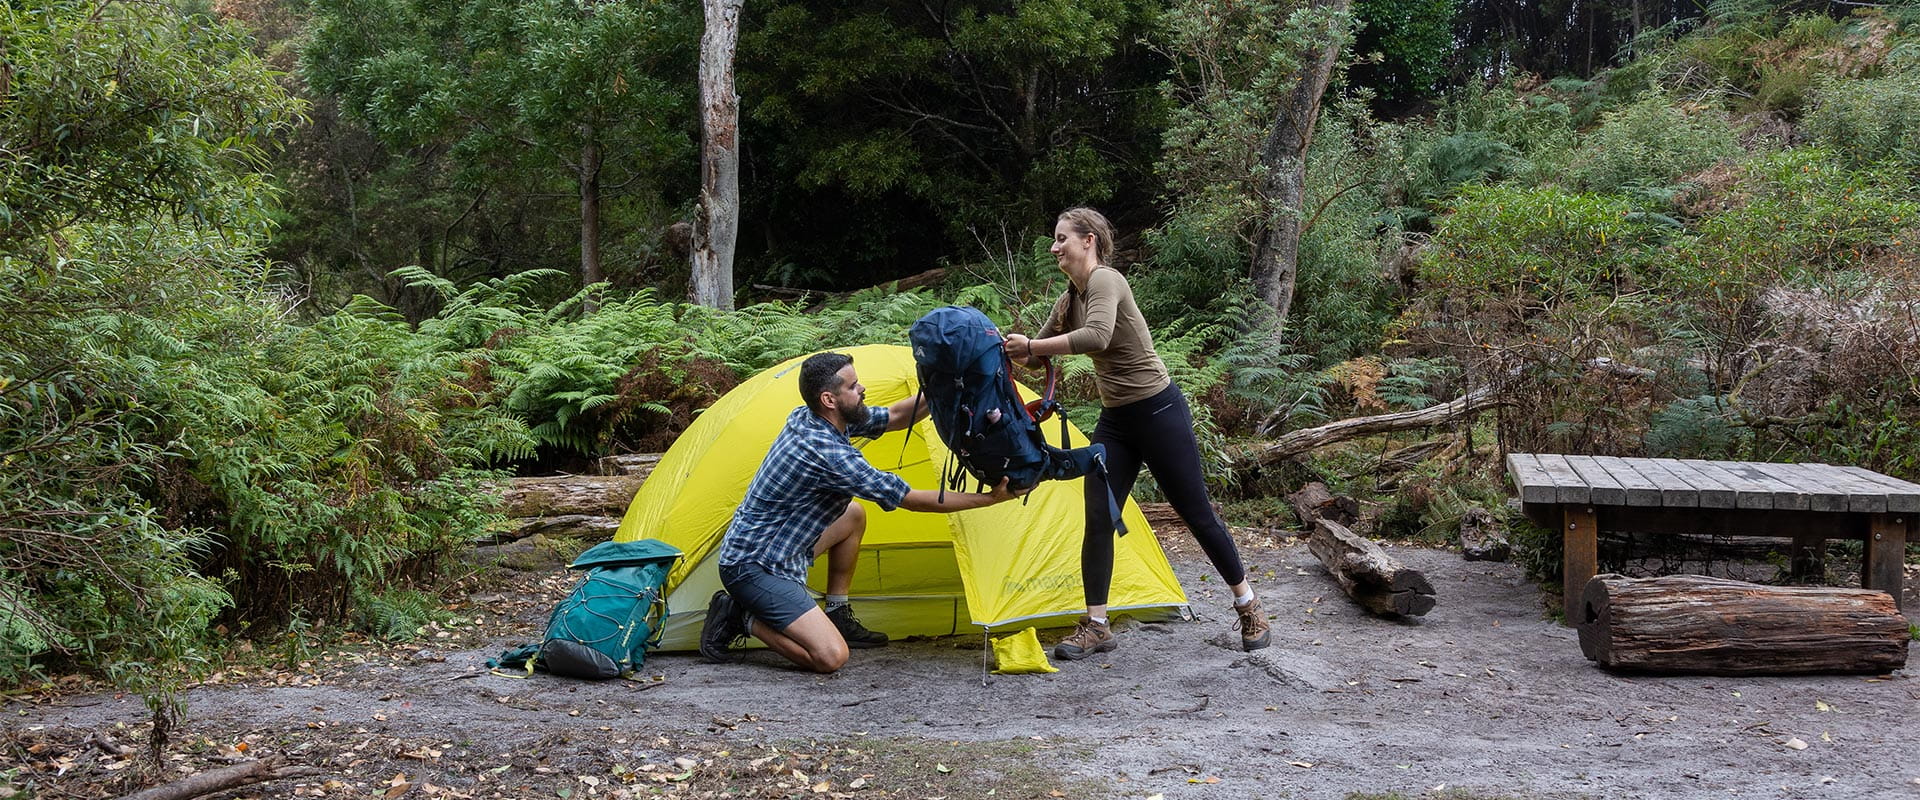 A kneeling man reaching out to take a hiking pack from a standing woman outside a yellow tent, surrounded by vegetation.